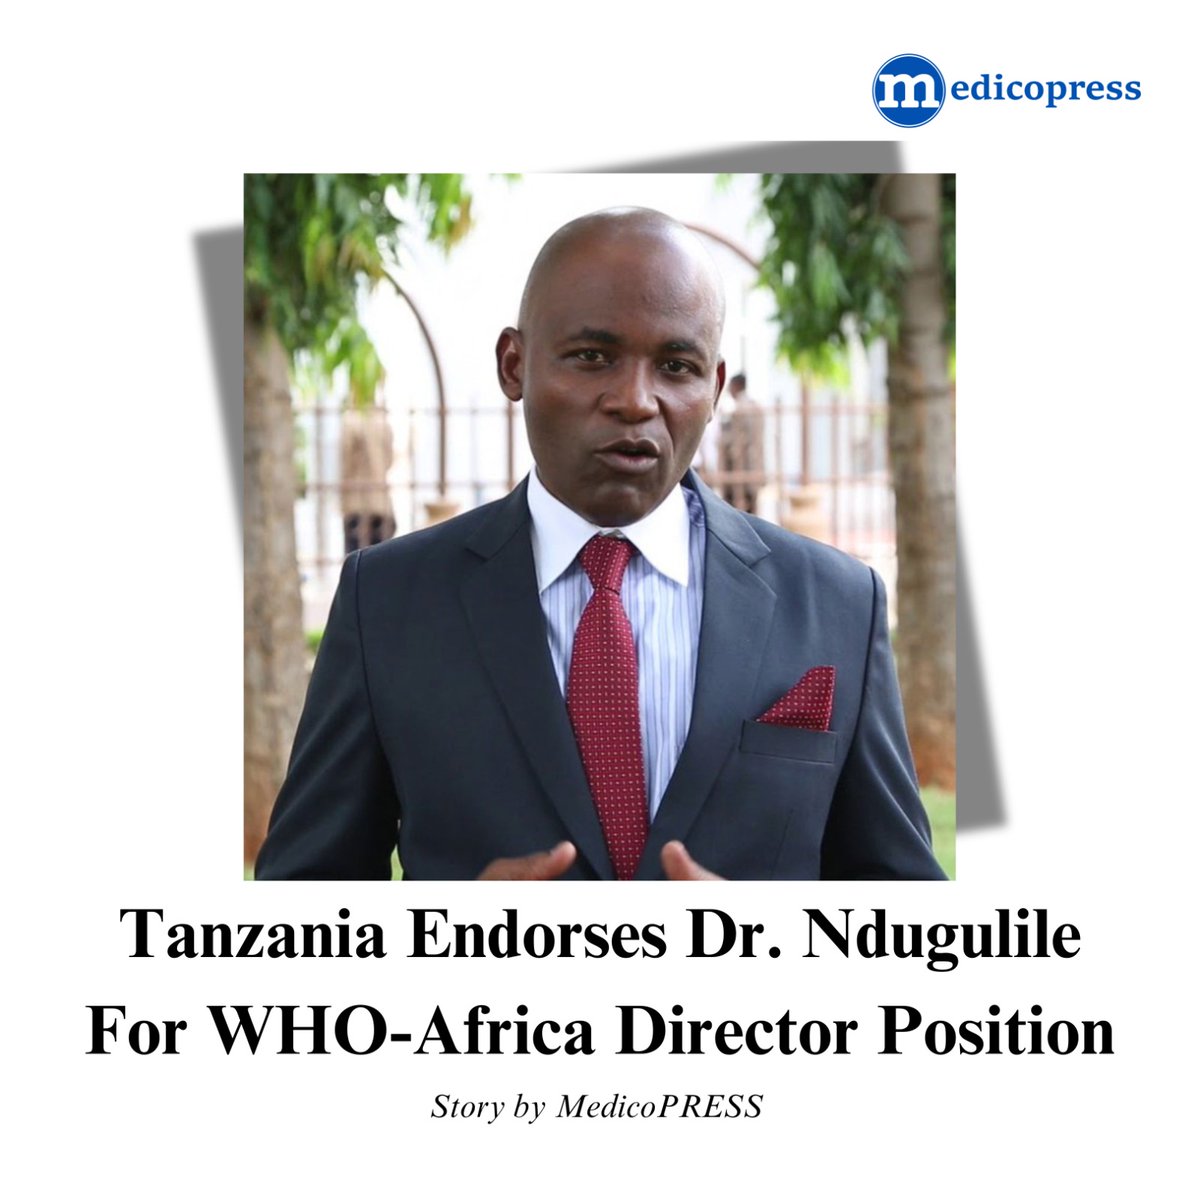 Dr. Ndugulile seeks to be the first East African to hold the position of Regional Director for Africa at the World Health Organization. medicopress.media/tanzania-endor…